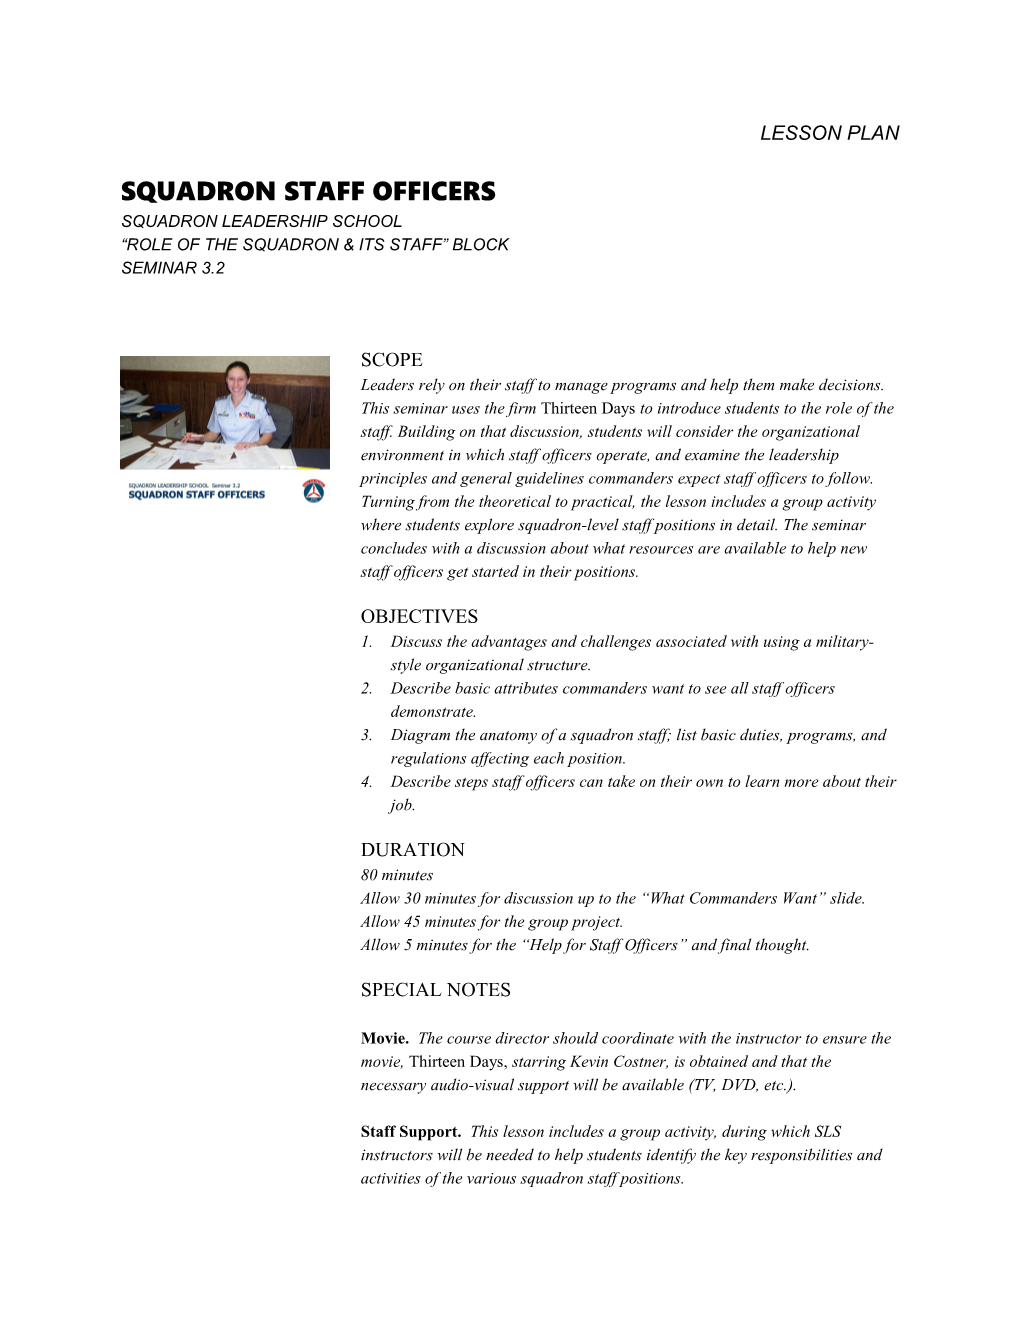 Squadron Staff Officers